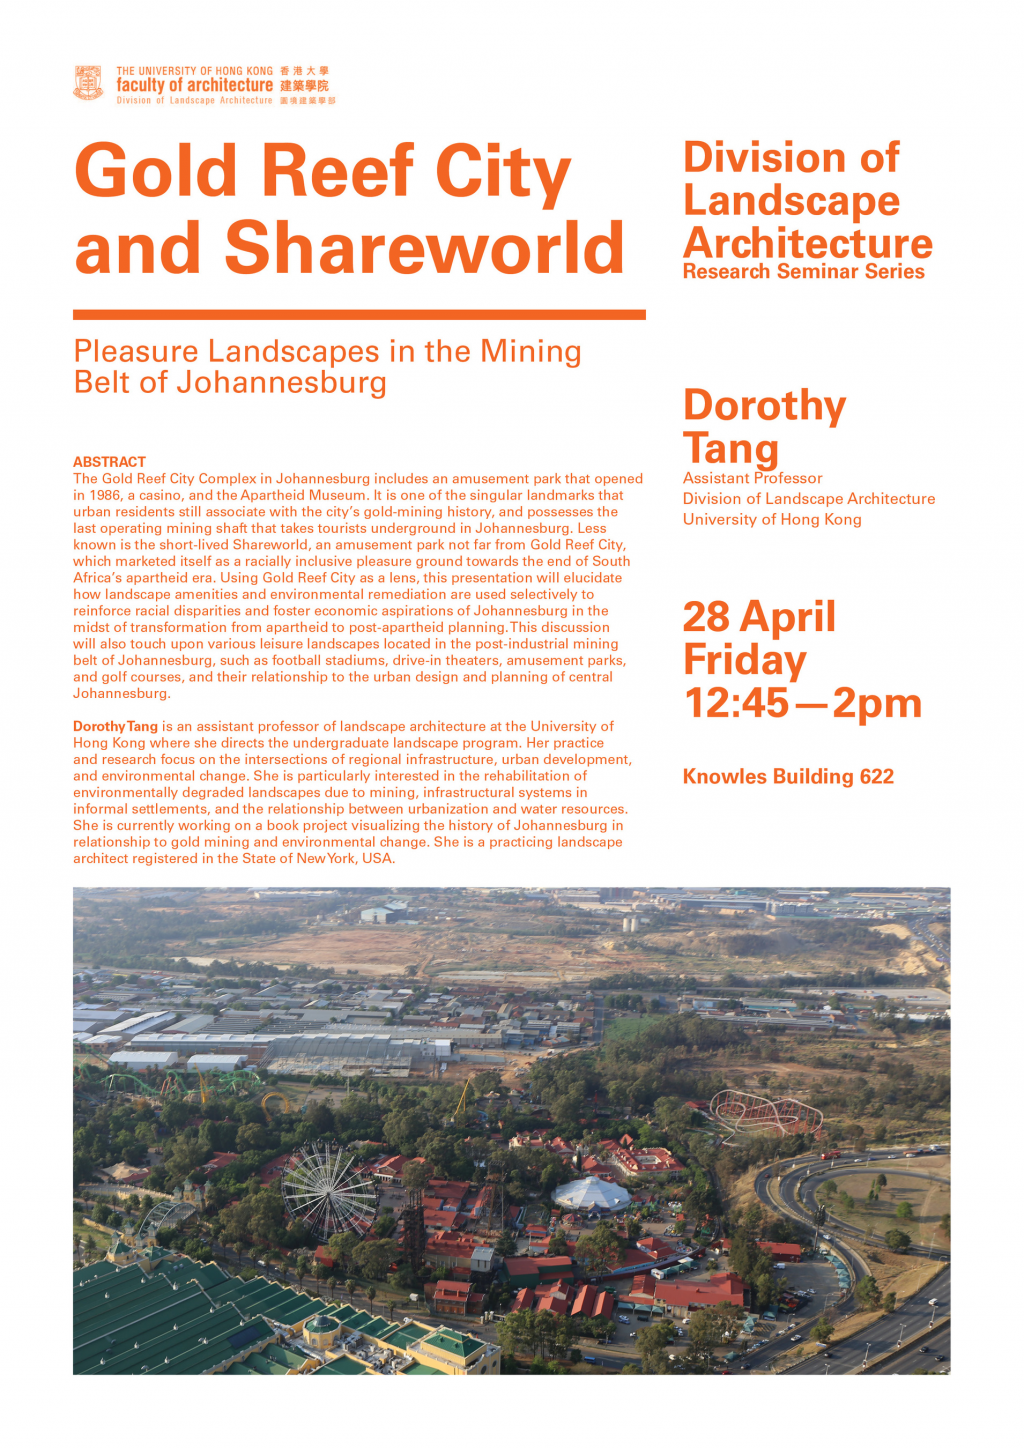 Research Seminar Series: Gold Reef City and Shareworld